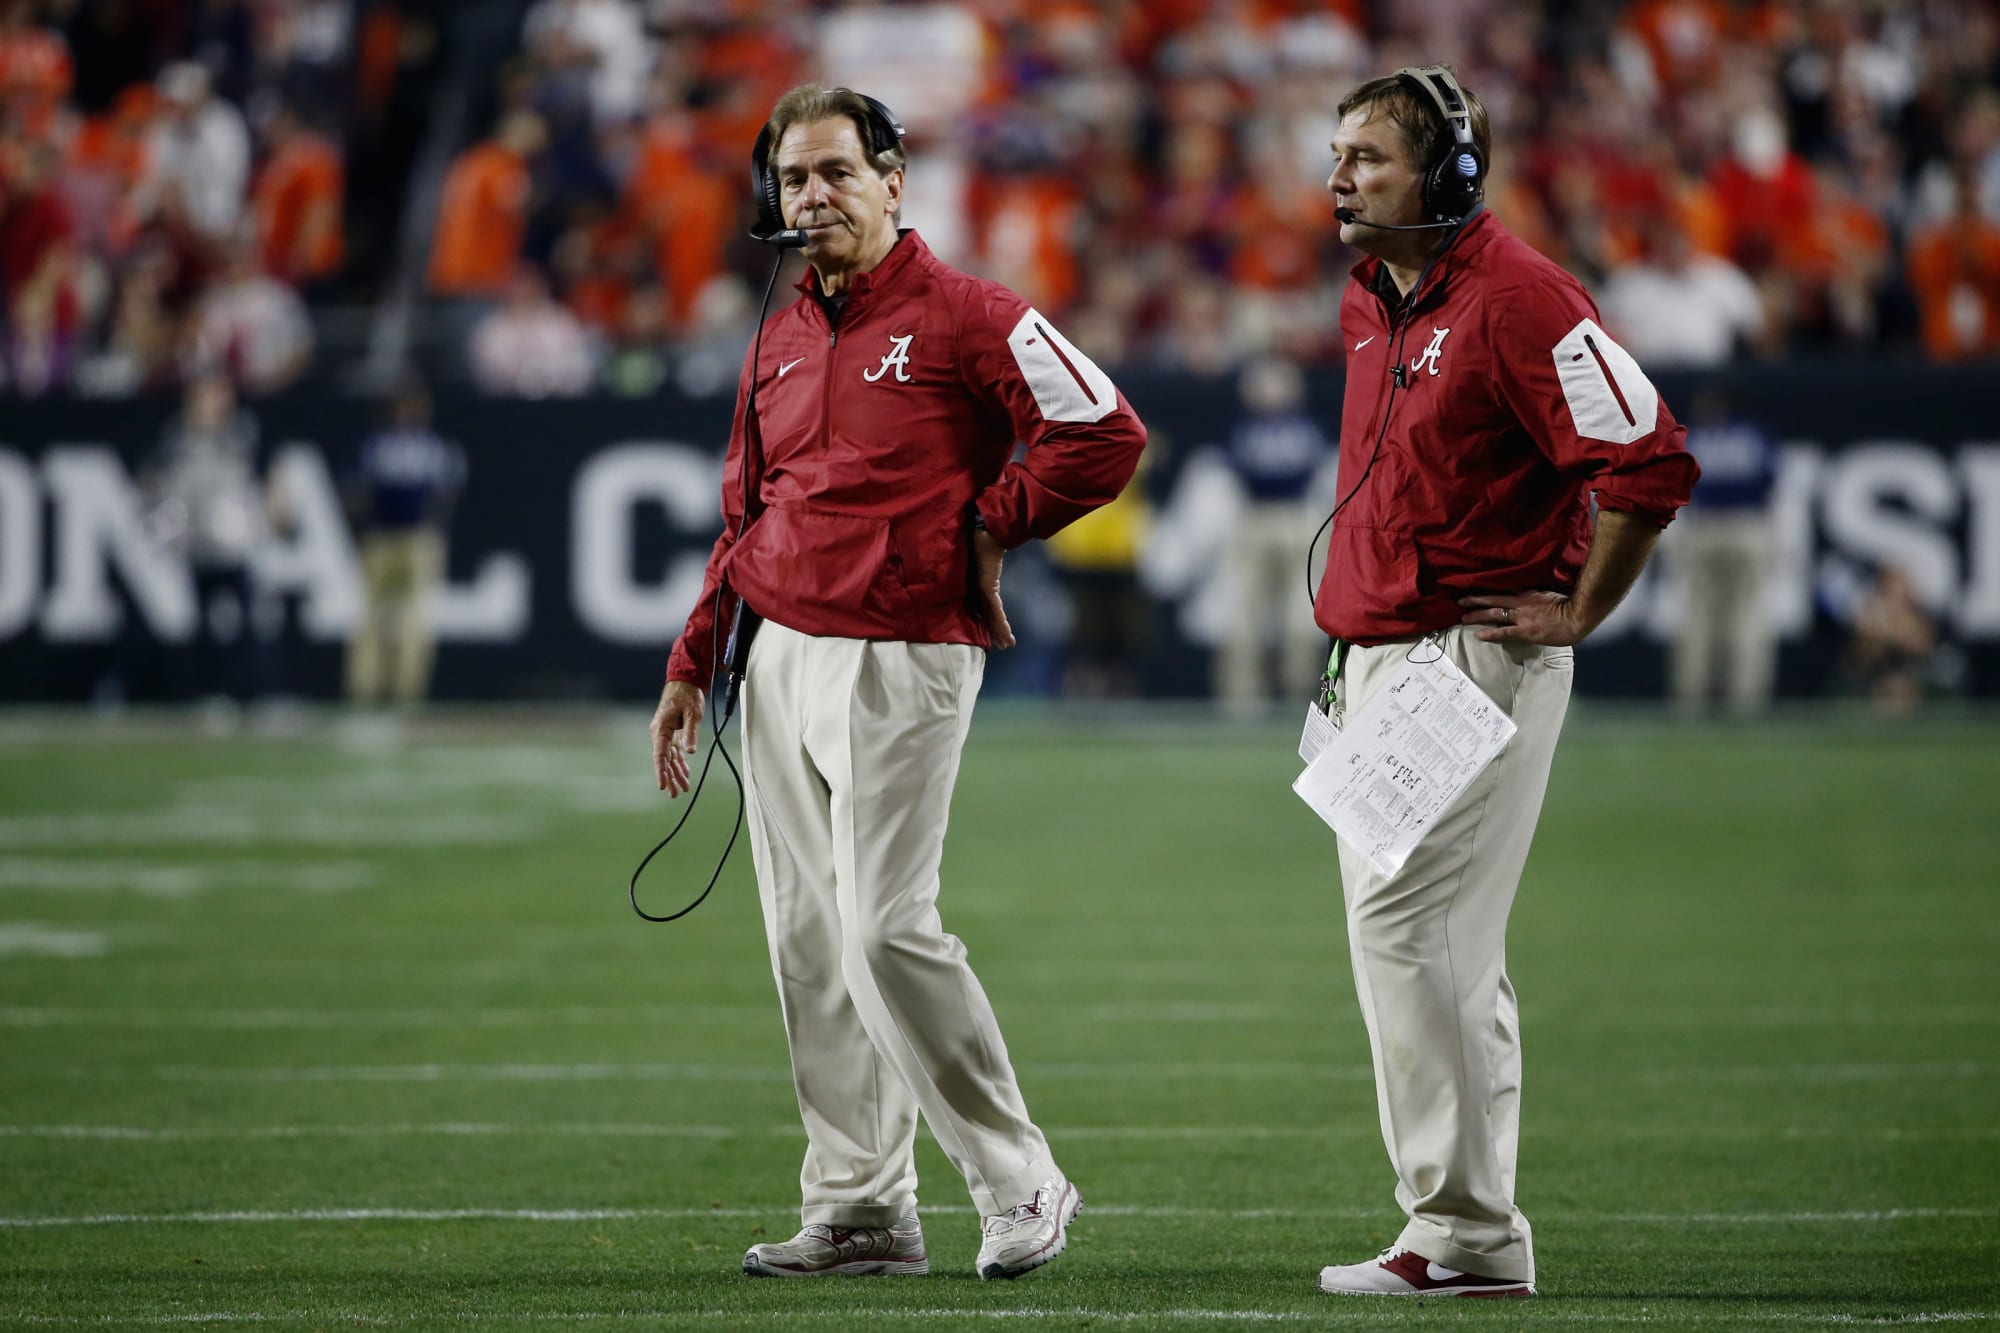 Where Are They Now? 2015 Alabama Football Coaching Staff